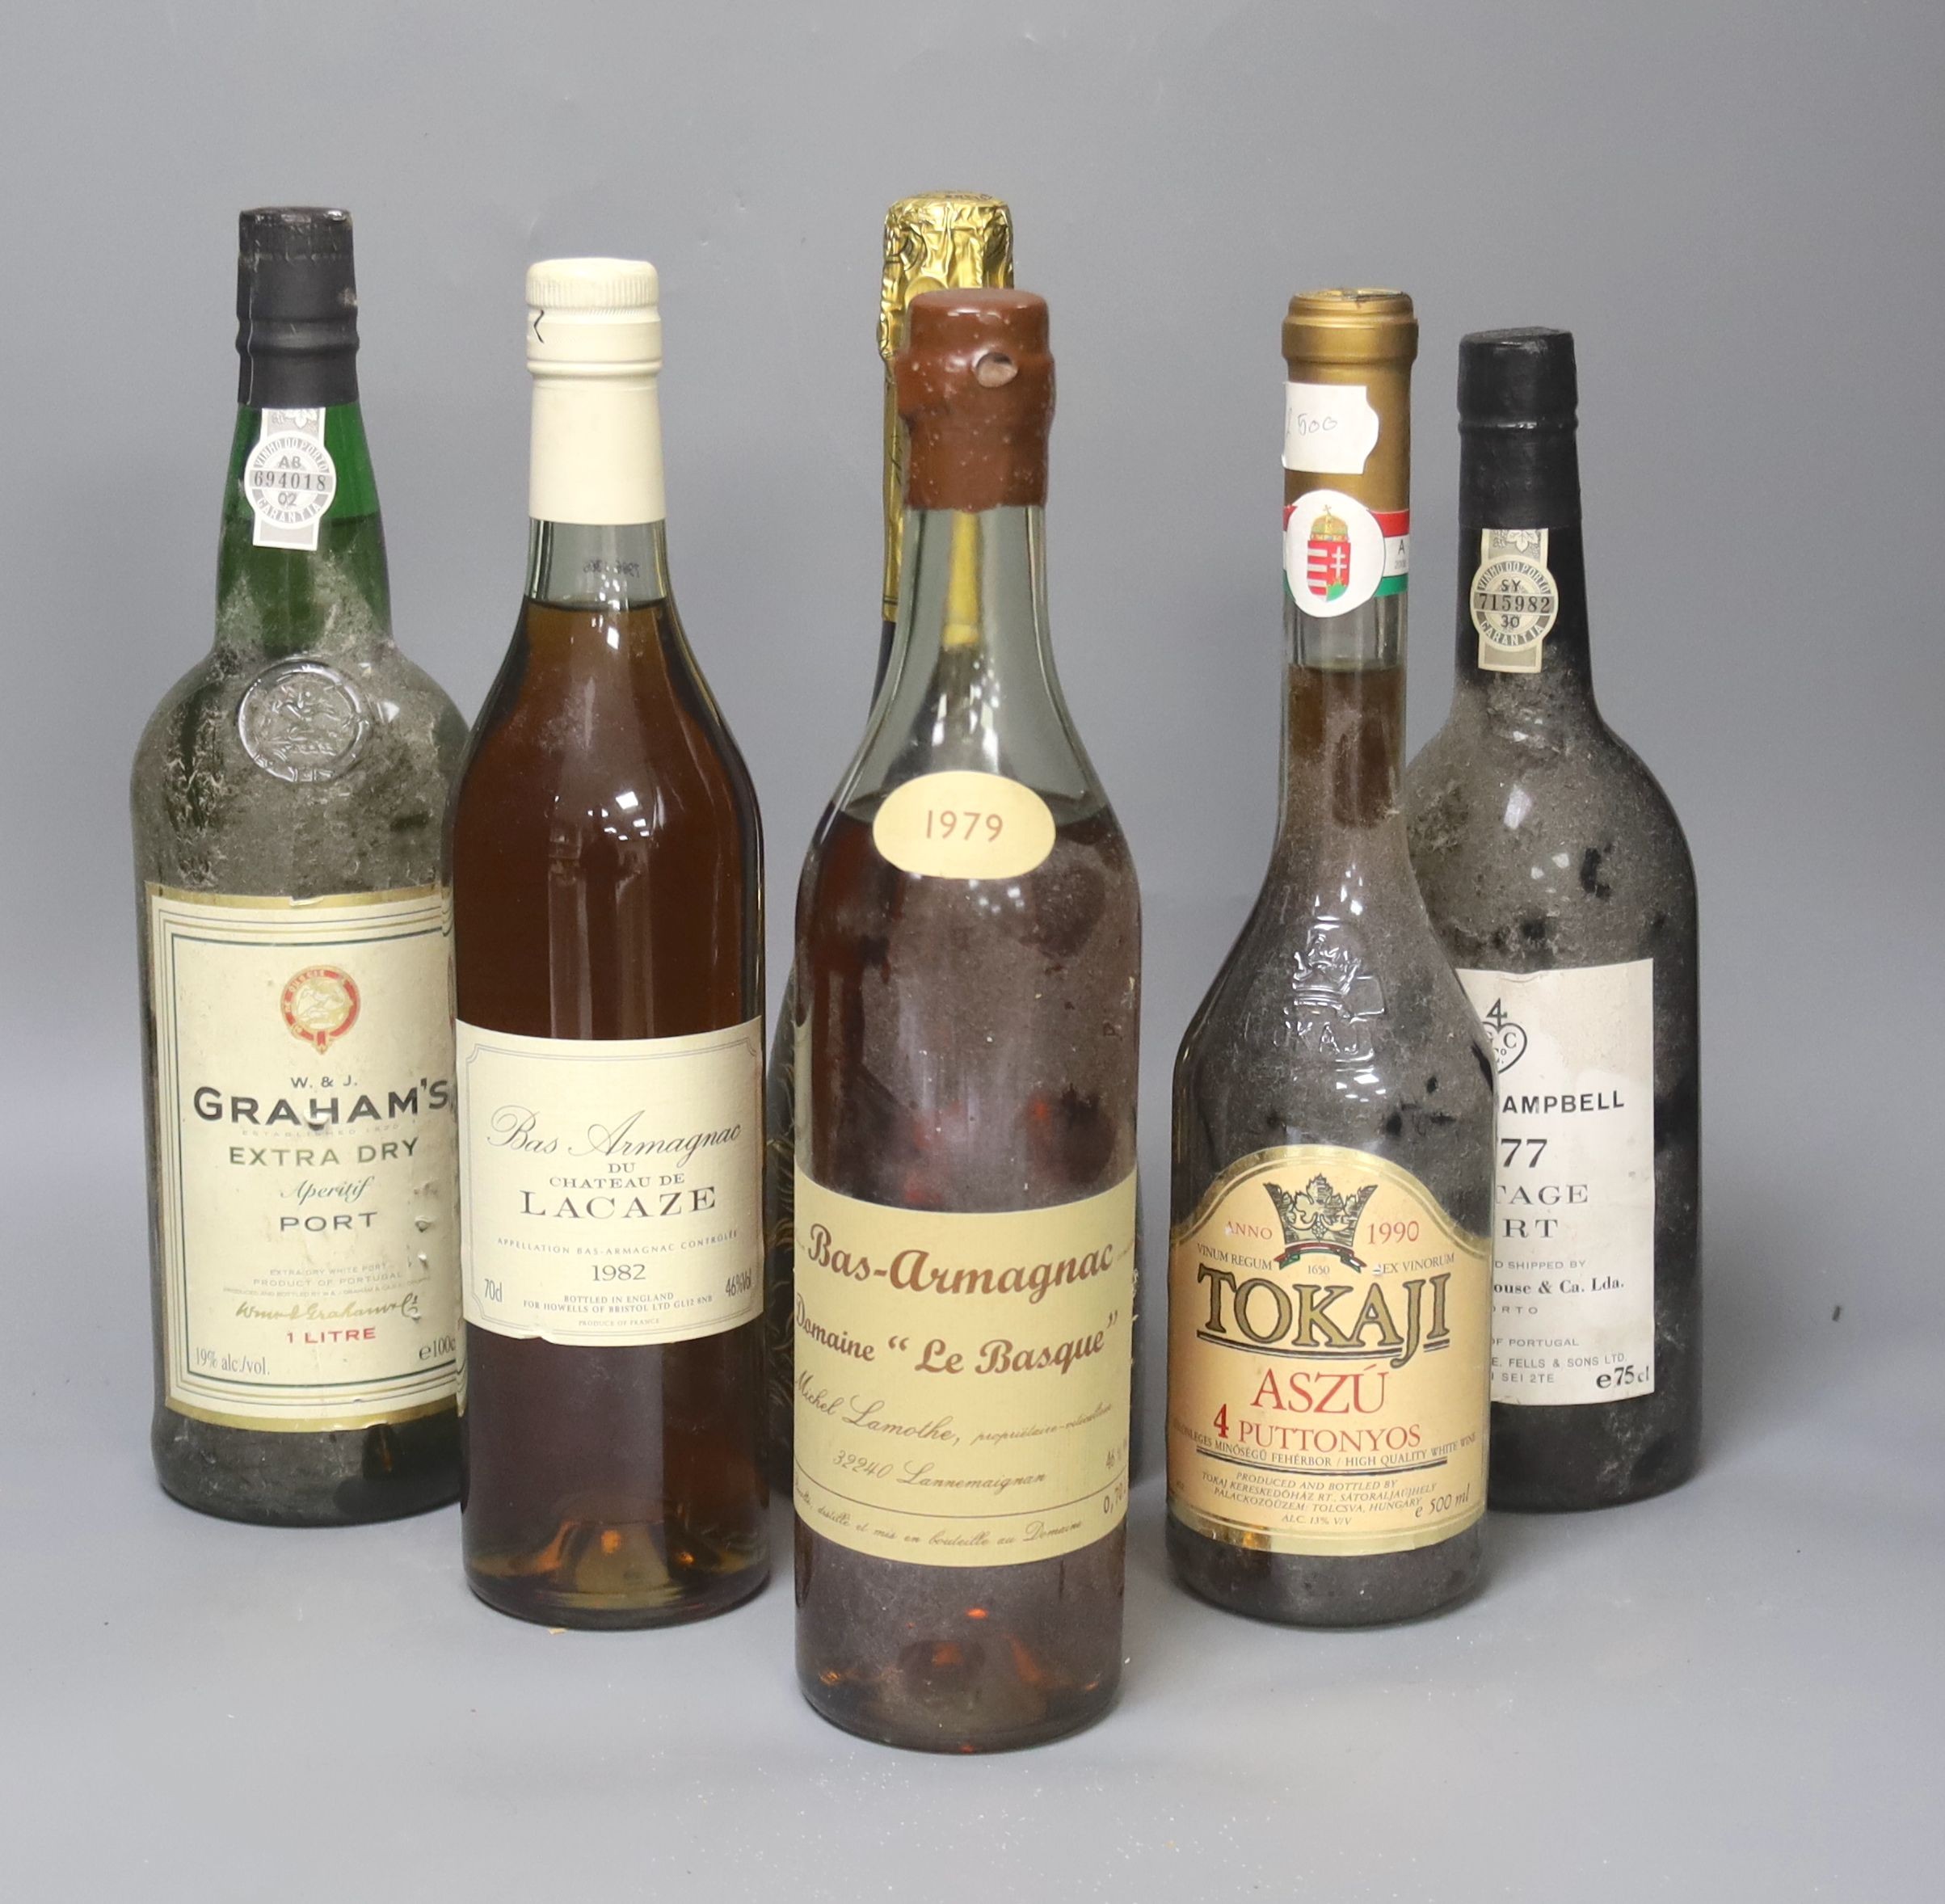 One bottle of Gould Campbell 1977 Vintage Port, one Domaine Le Basque Armagnac 1979, one Chateau de Lacaze Armagnac, 1982, one Tokaji, 1990, one Graham's Extra Dry Port and one Duvall Leroy 2000 Champagne.